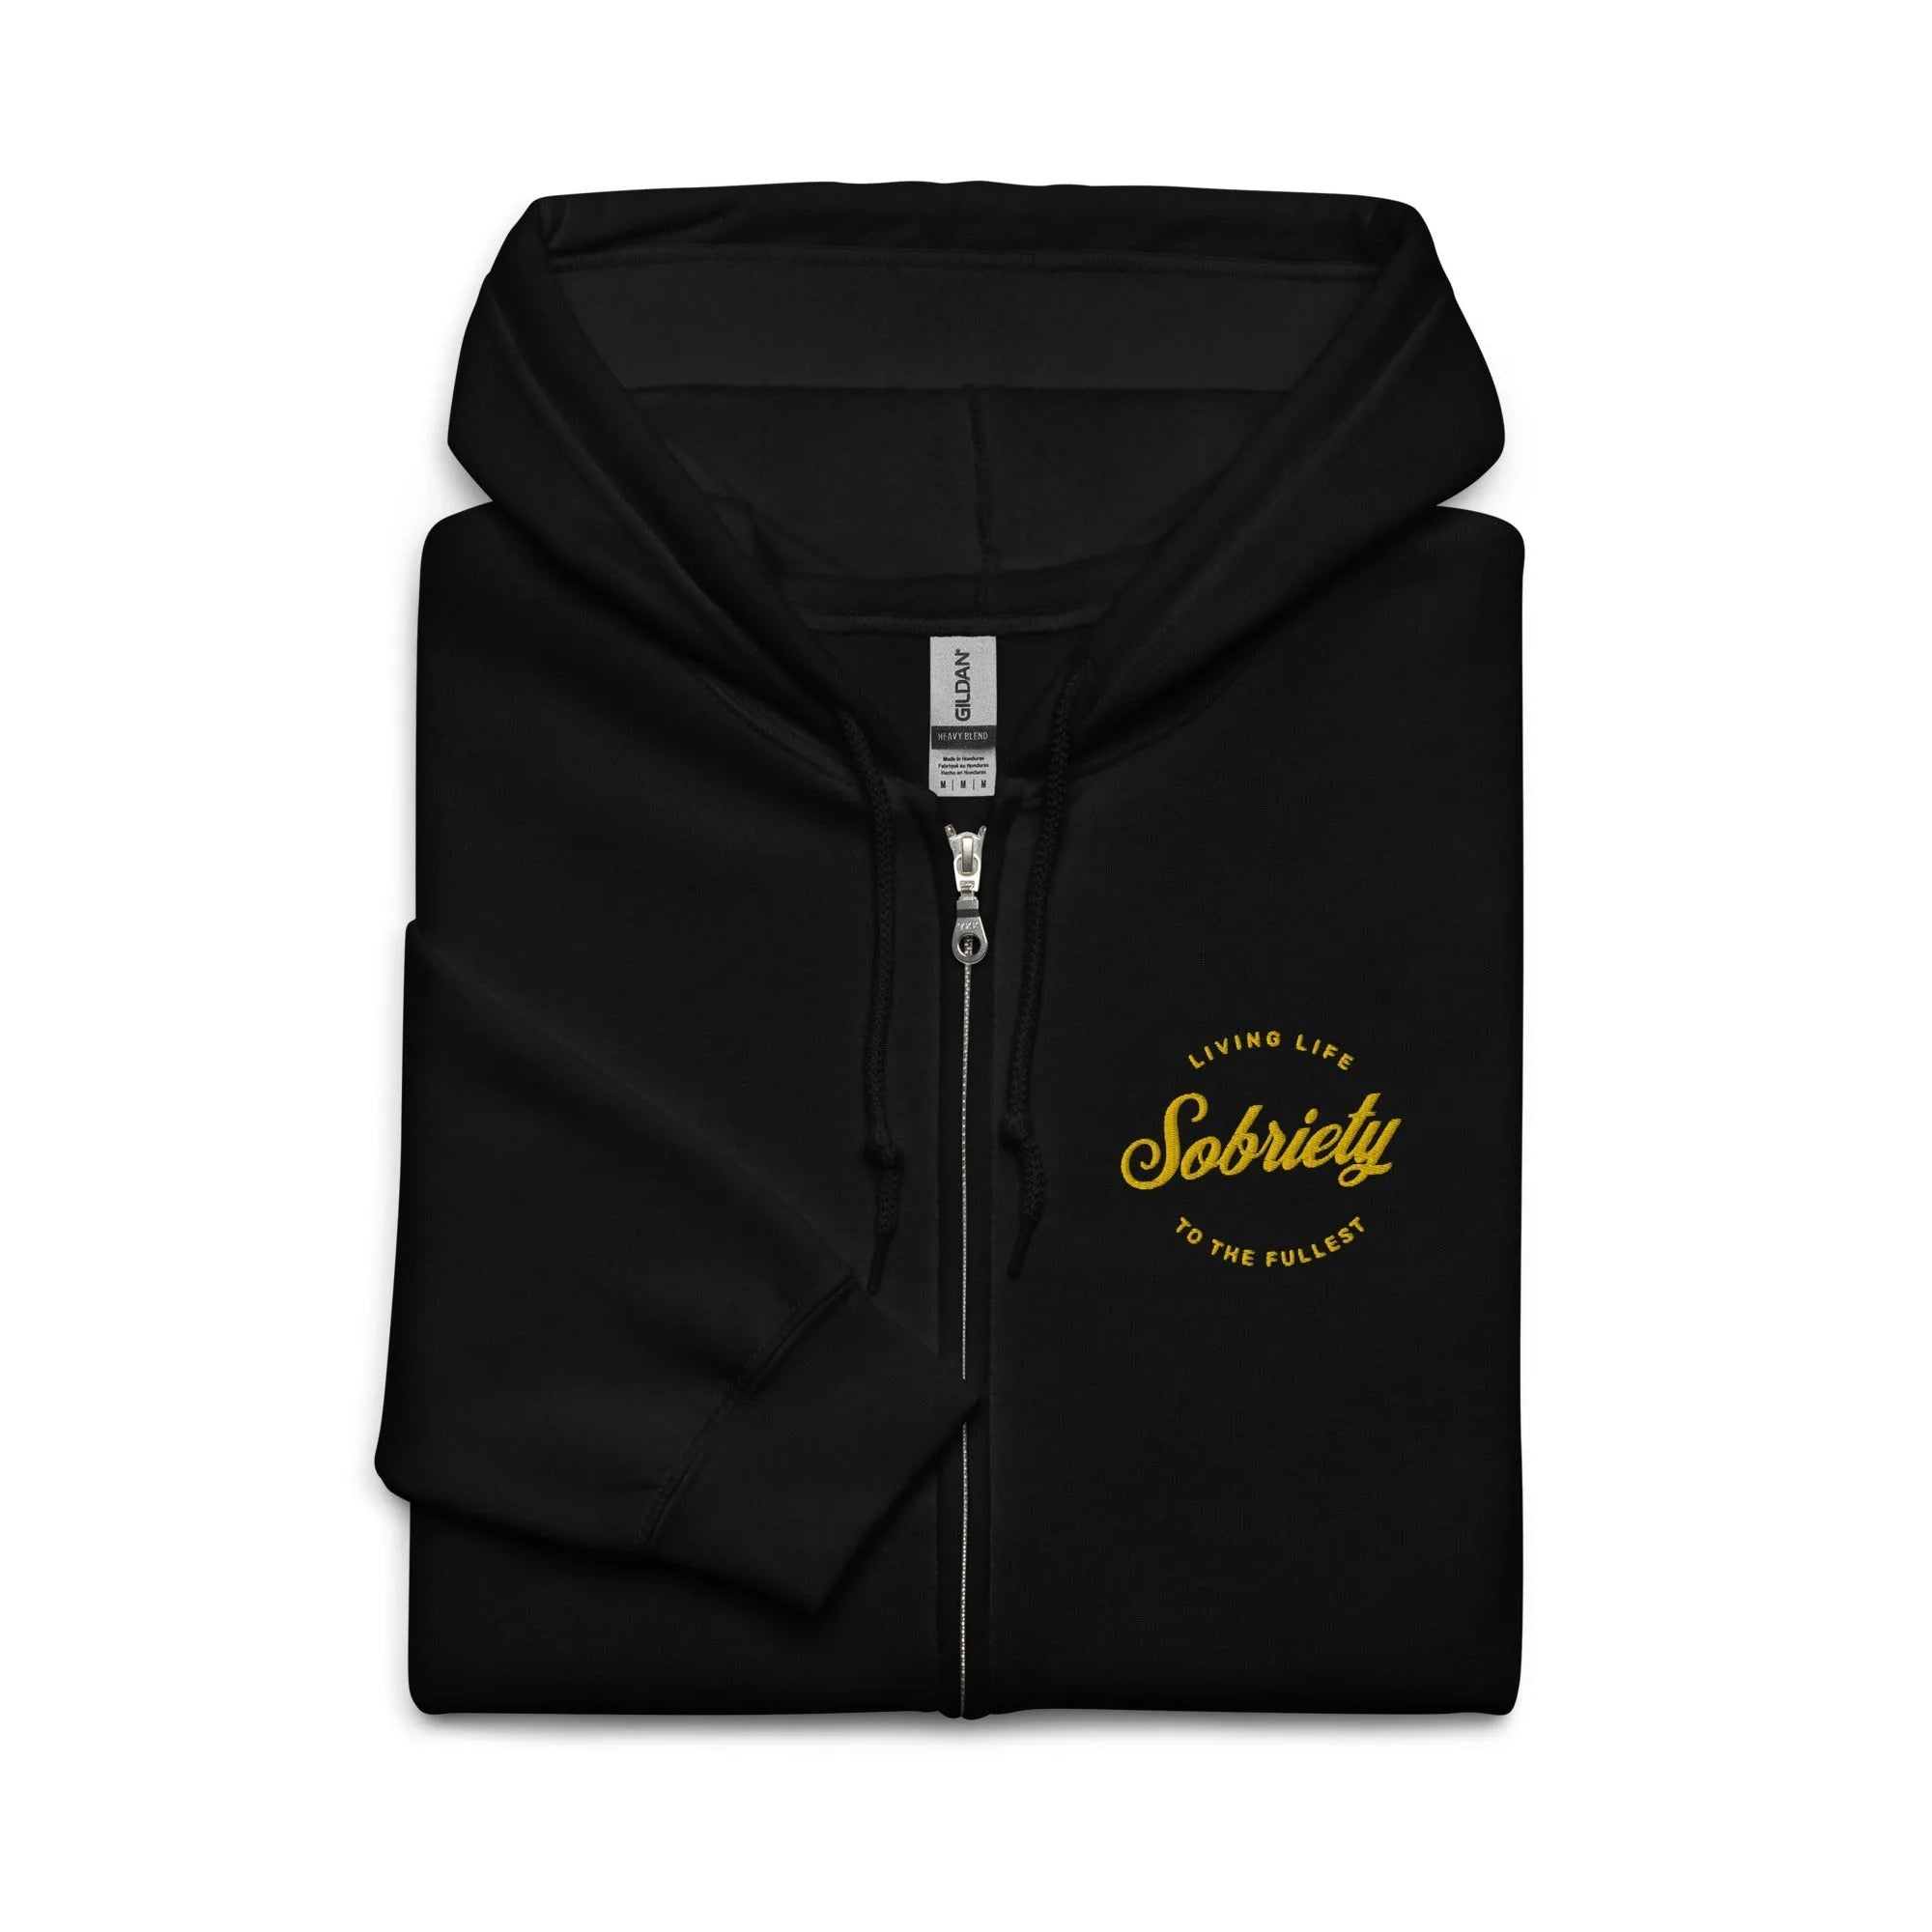 Sobriety, Living Life To The Fullest - Embroidered zip hoodie - Sobervation